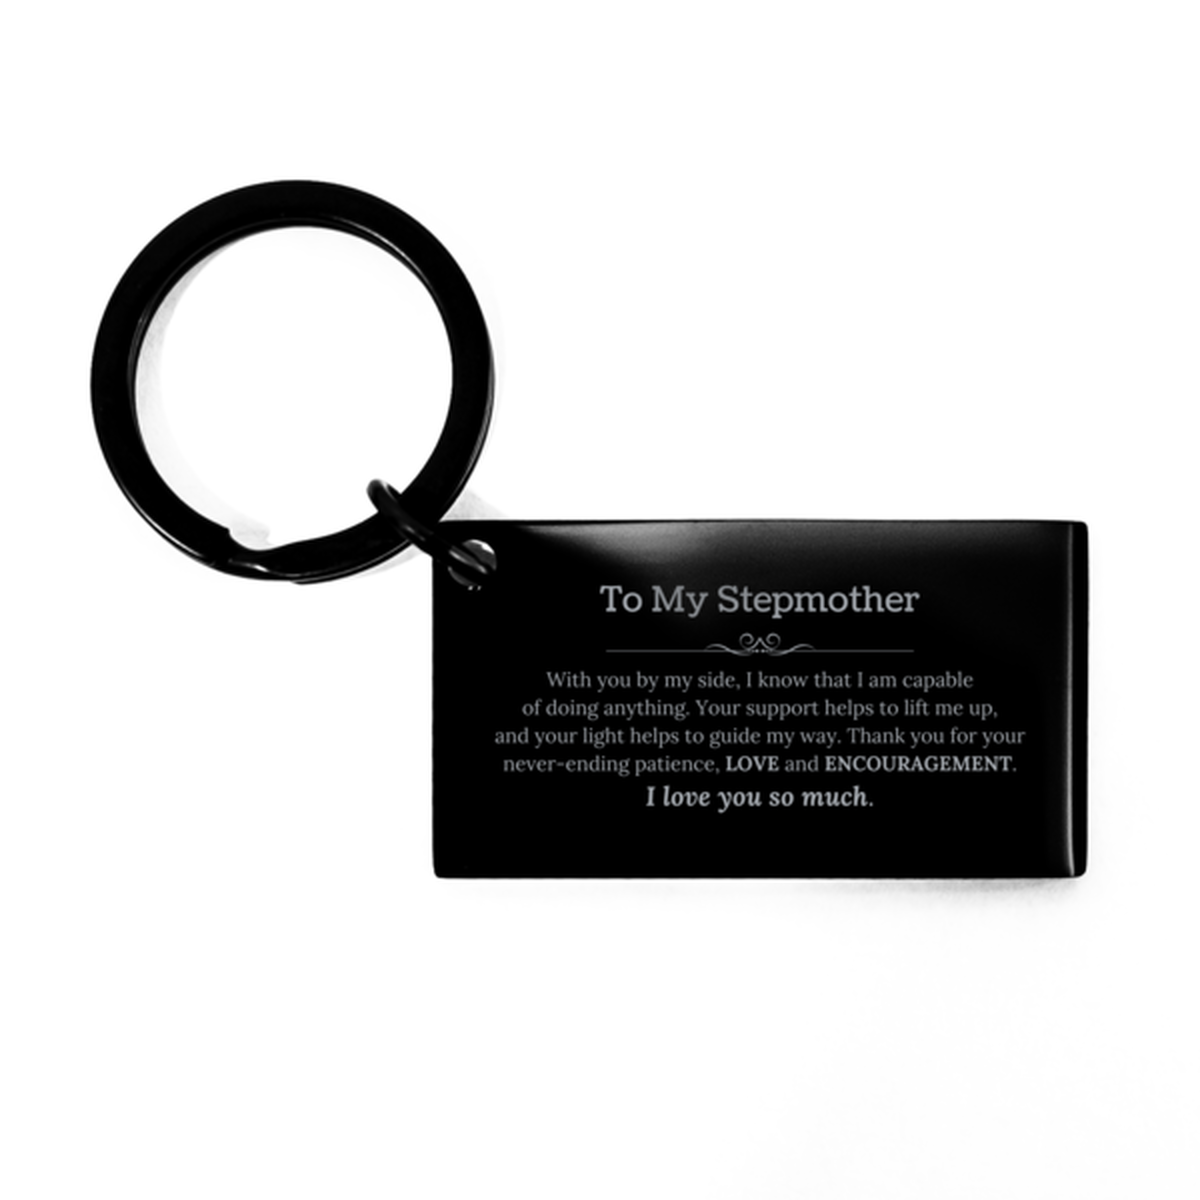 Appreciation Stepmother Keychain Gifts, To My Stepmother Birthday Christmas Wedding Keepsake Gifts for Stepmother With you by my side, I know that I am capable of doing anything. I love you so much